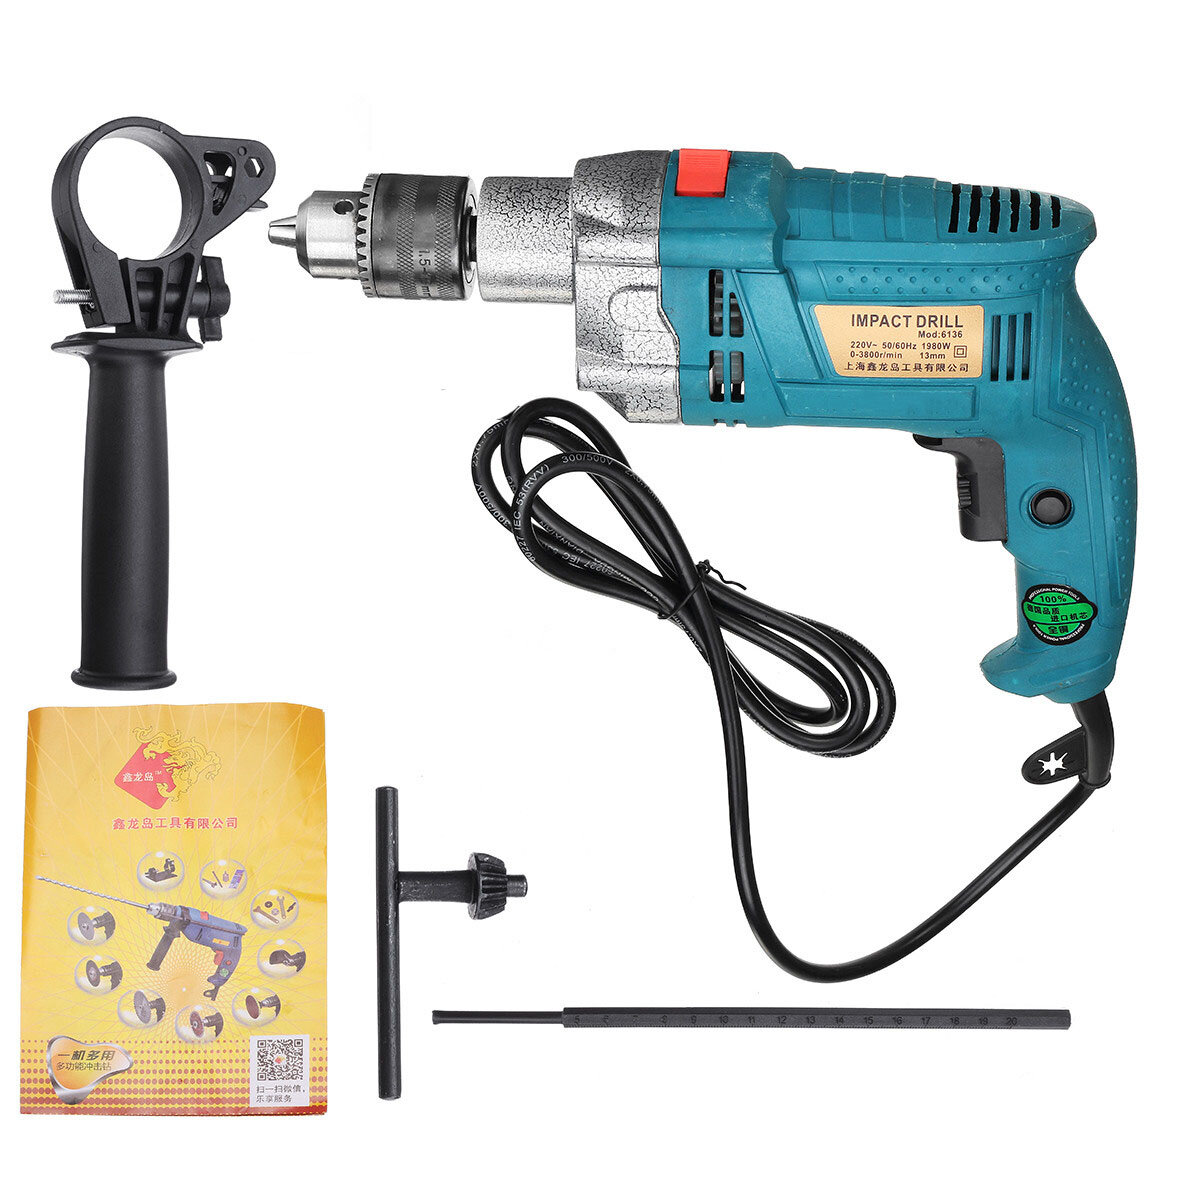 Image of 1980W 3800rpm Electric Impact Drill 360° Rotary Skid-Proof Handle With Depth Measuring Scale Spinal Cooling System Hand